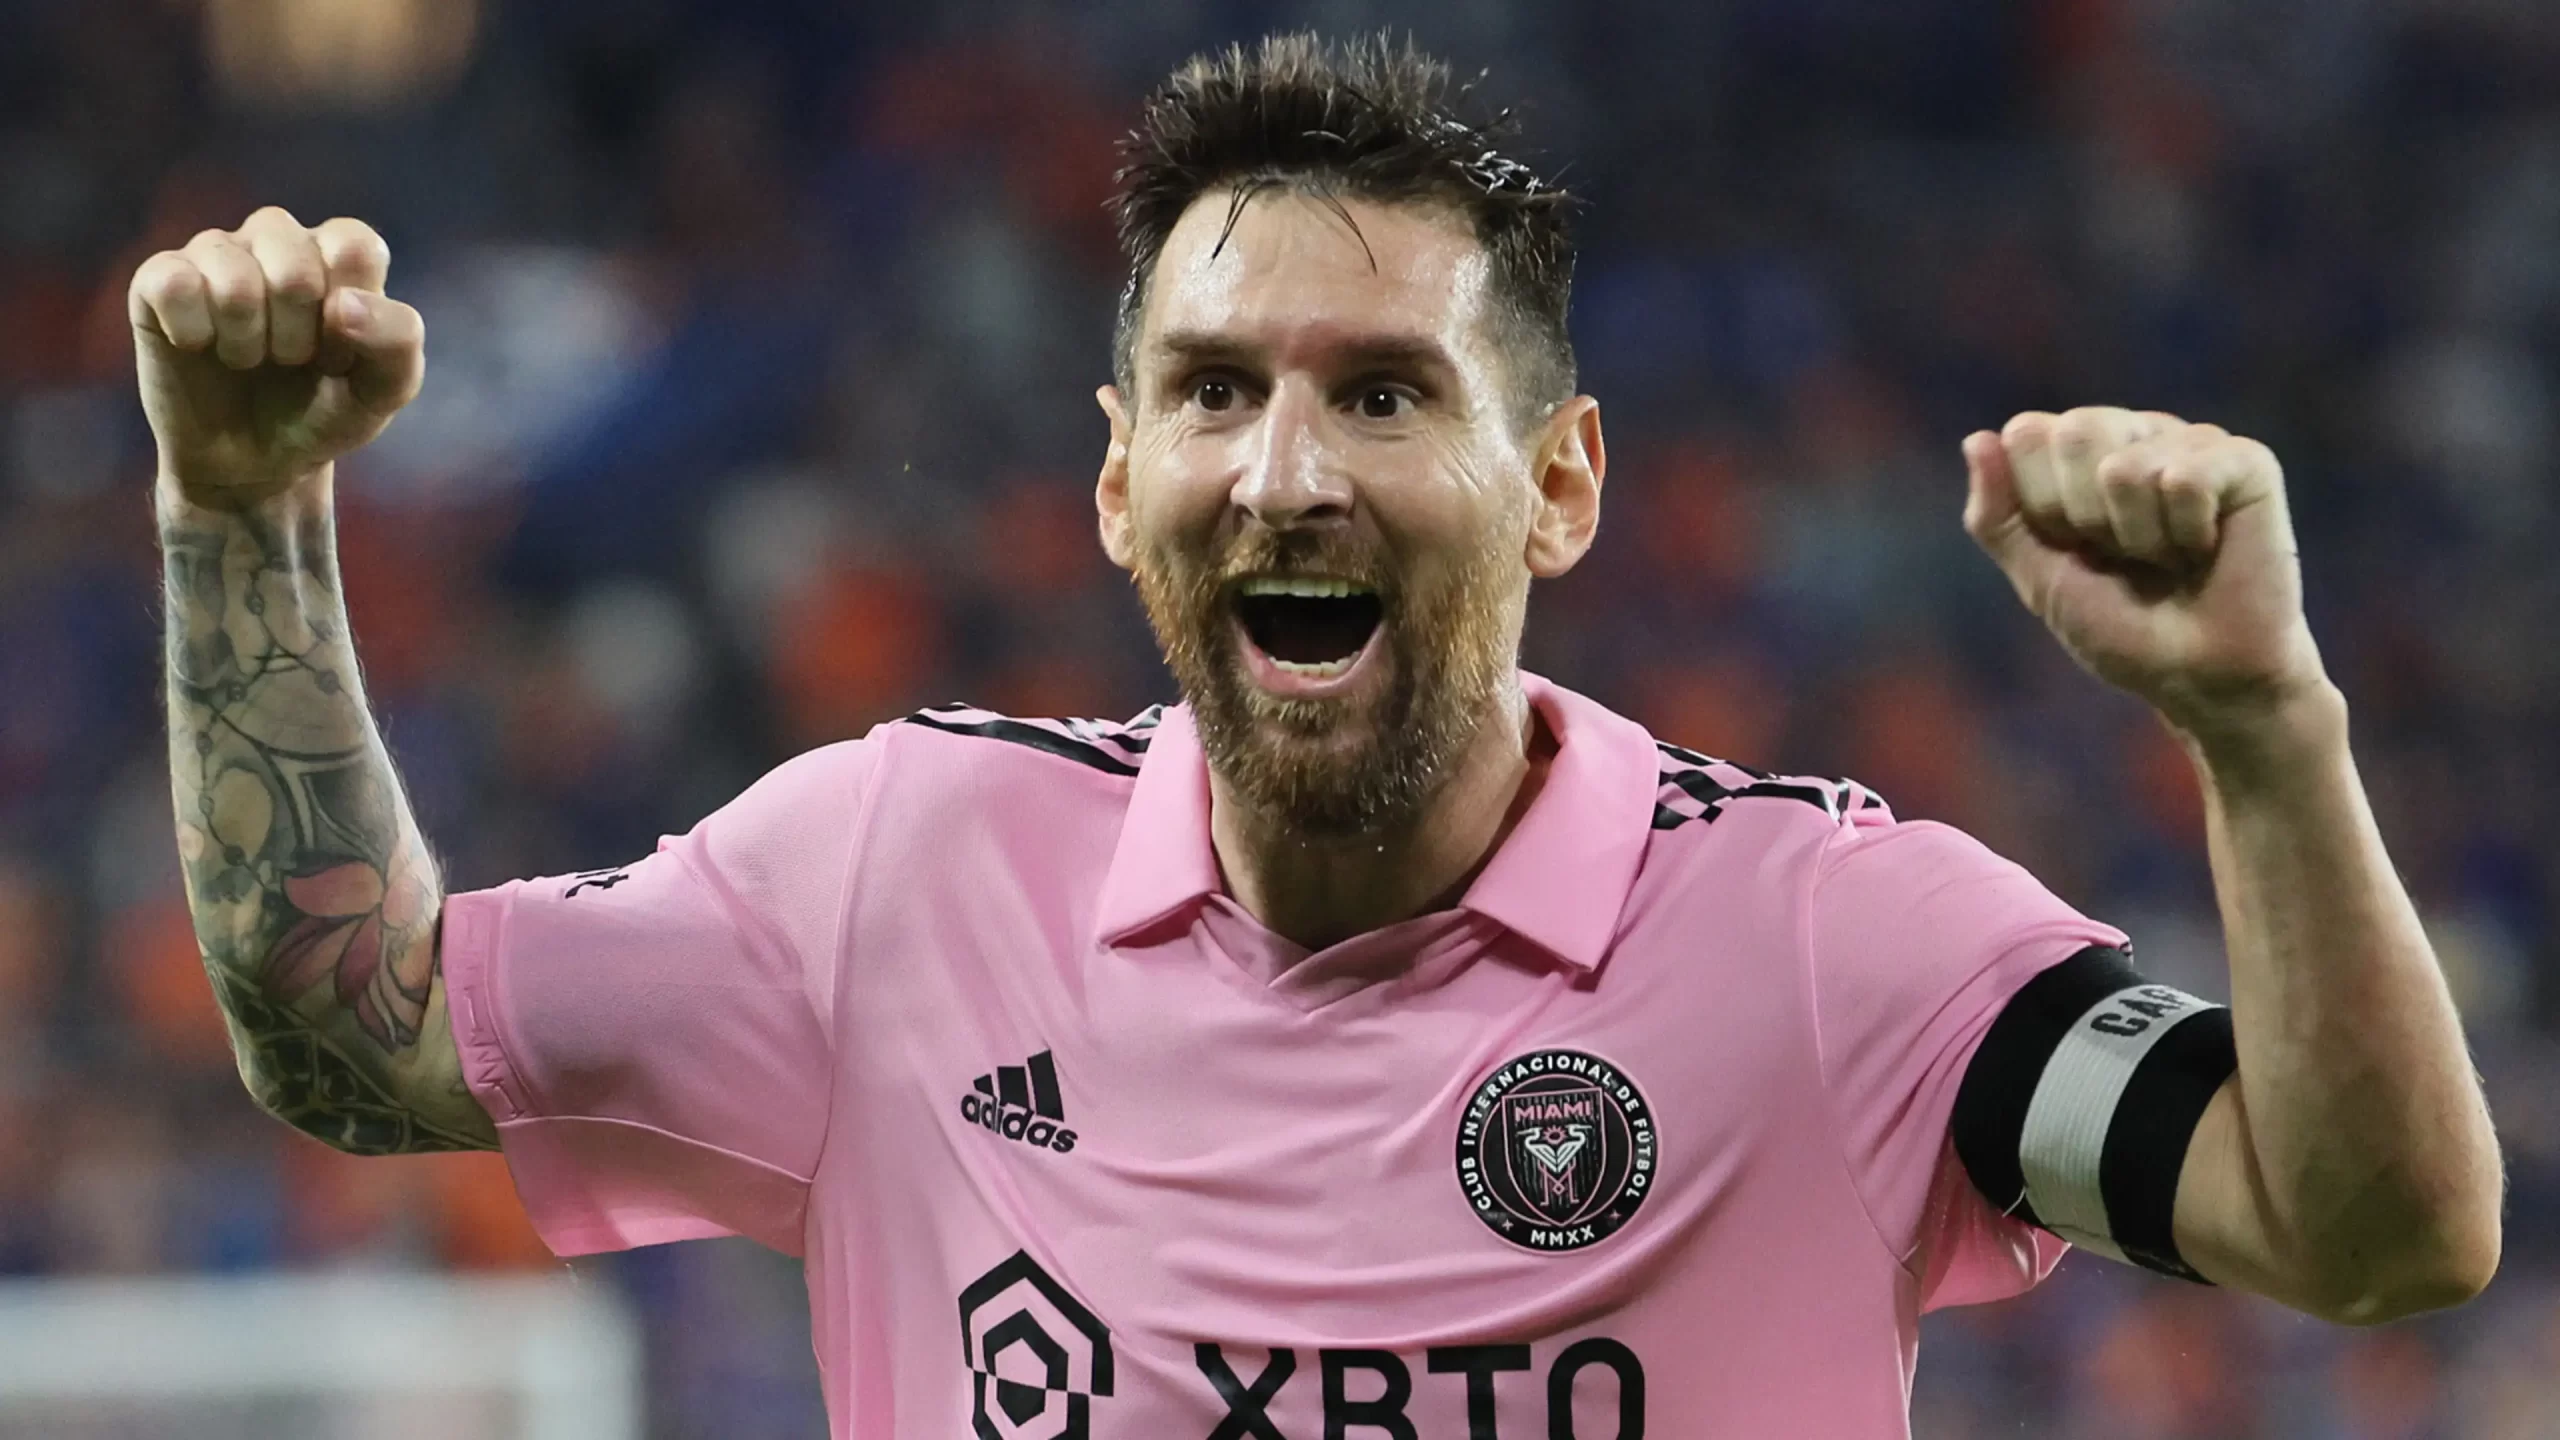 Inter Miami Secures $550k Transfer Boost Following Facundo Farias' Injury, While Augustin Palavecino Approaches Loan Move to Join Lionel Messi & Co.